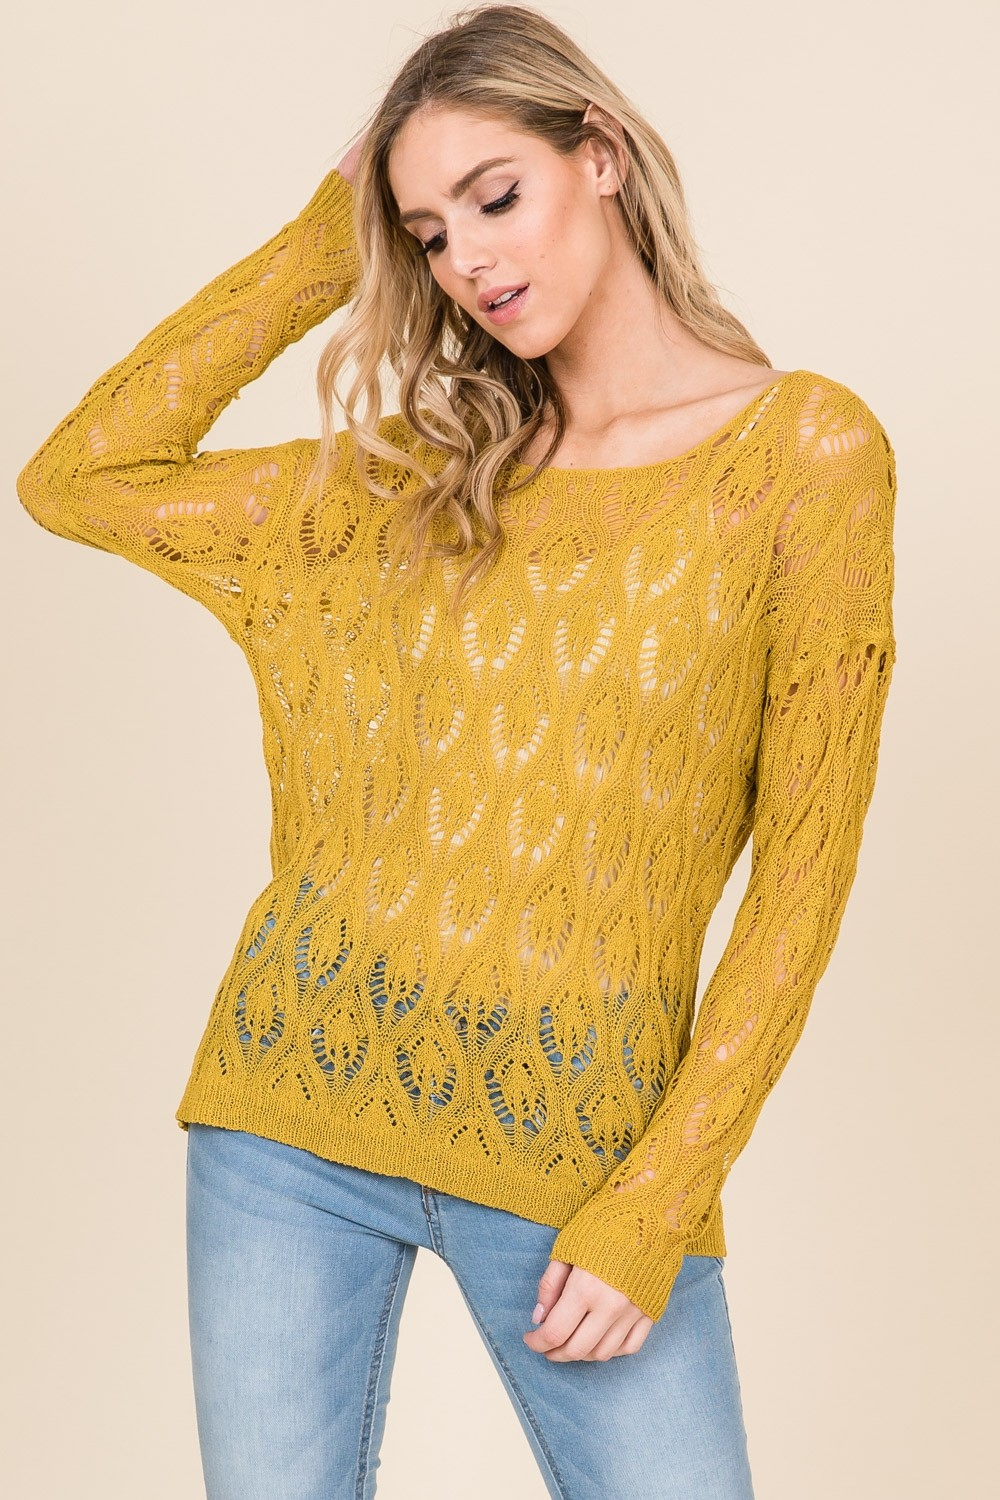 3-categories-of-crochet-long-sleeve-top-pattern-that-you-must-try